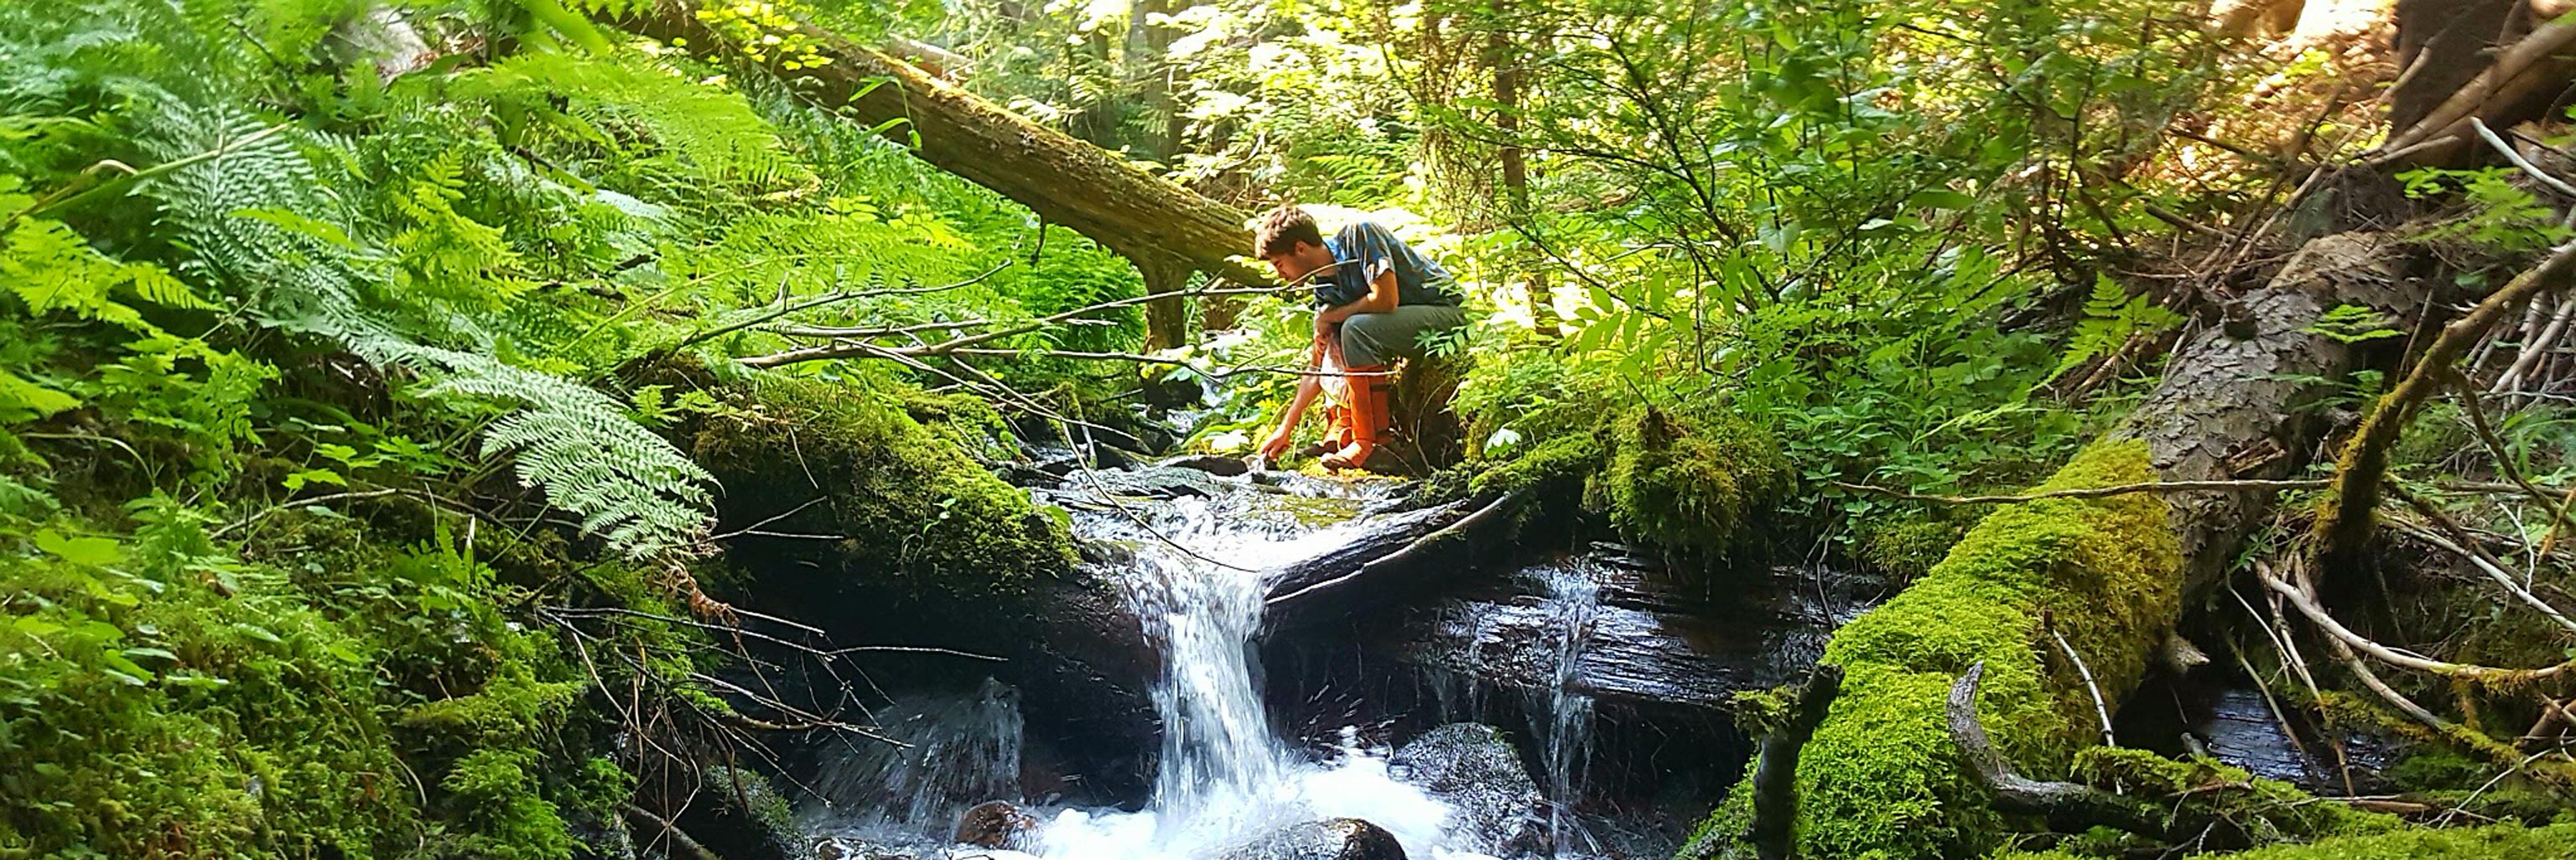 Student taking a sample from a river in the forest